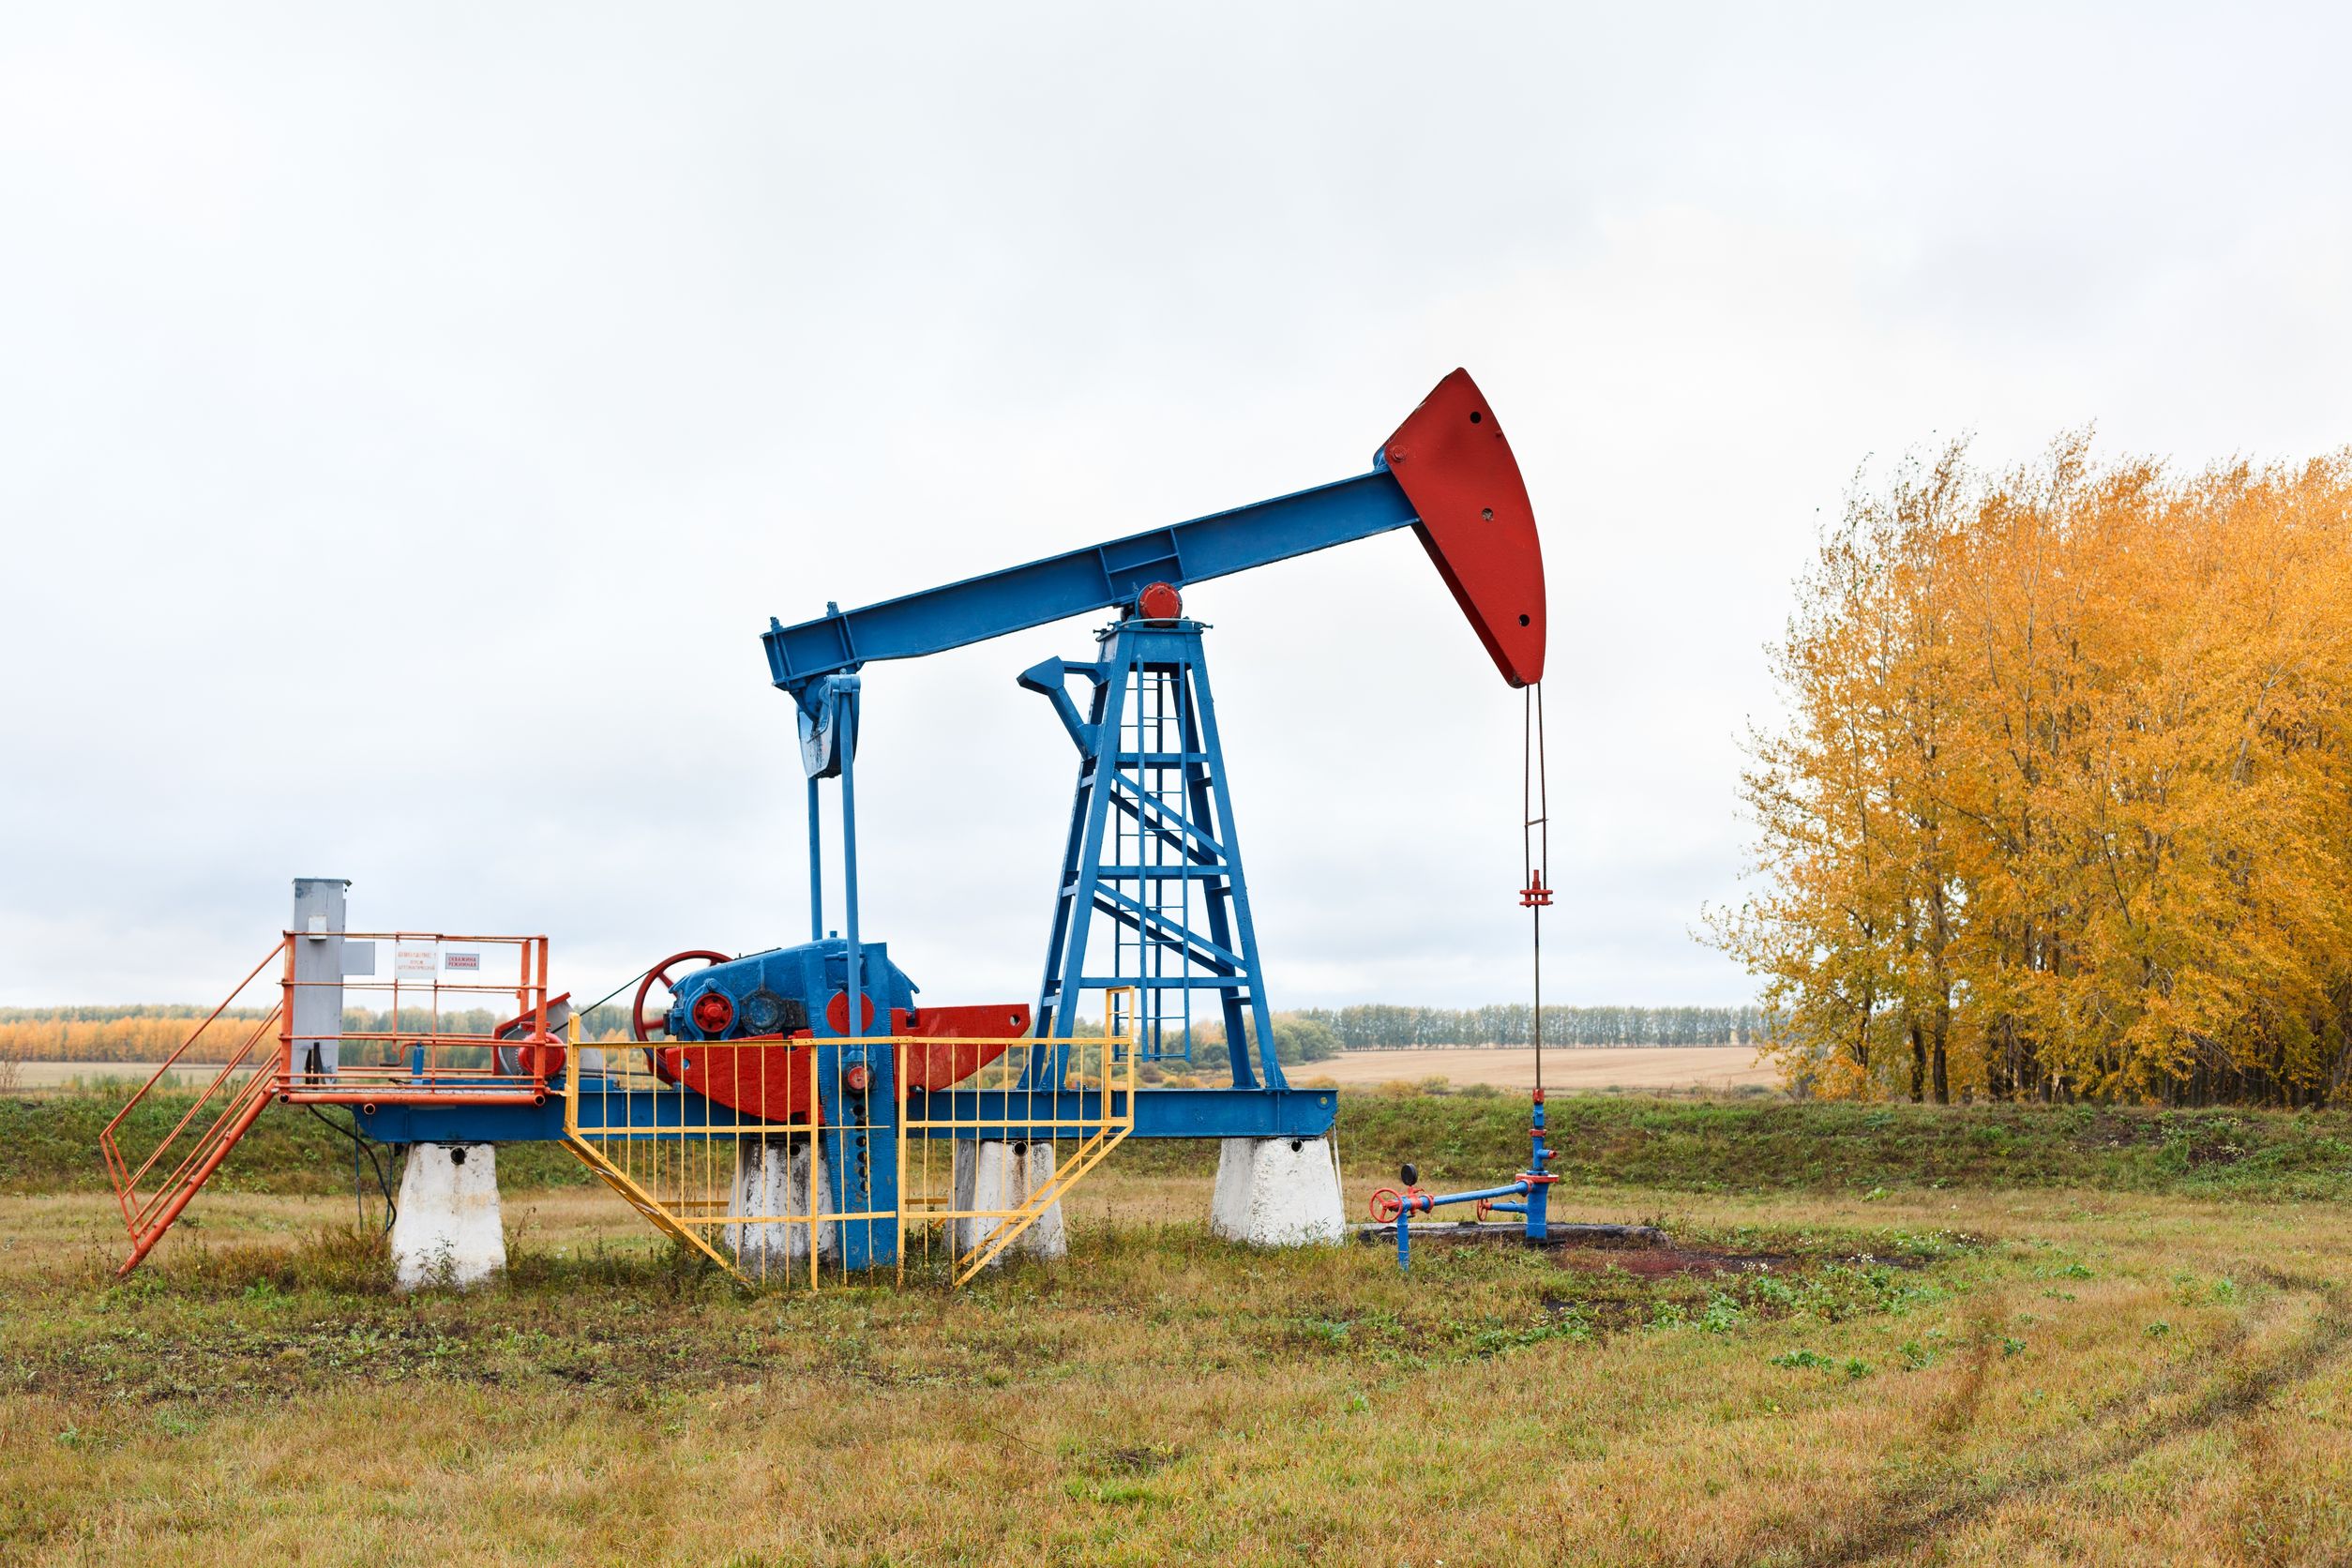 How to Find Oilfield Equipment for Sale